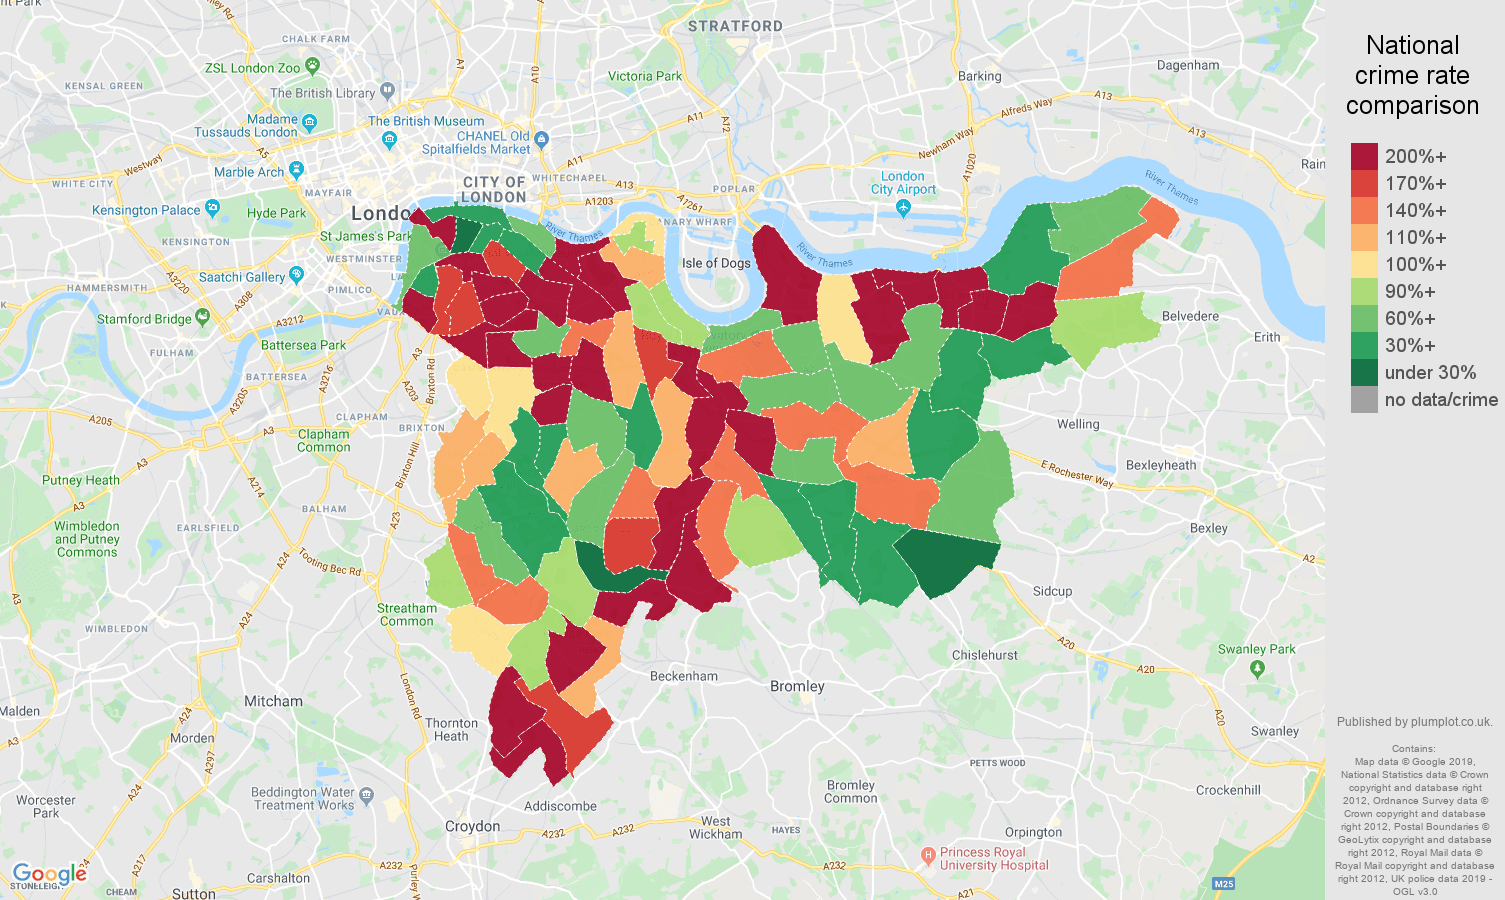 South East London possession of weapons crime rate comparison map